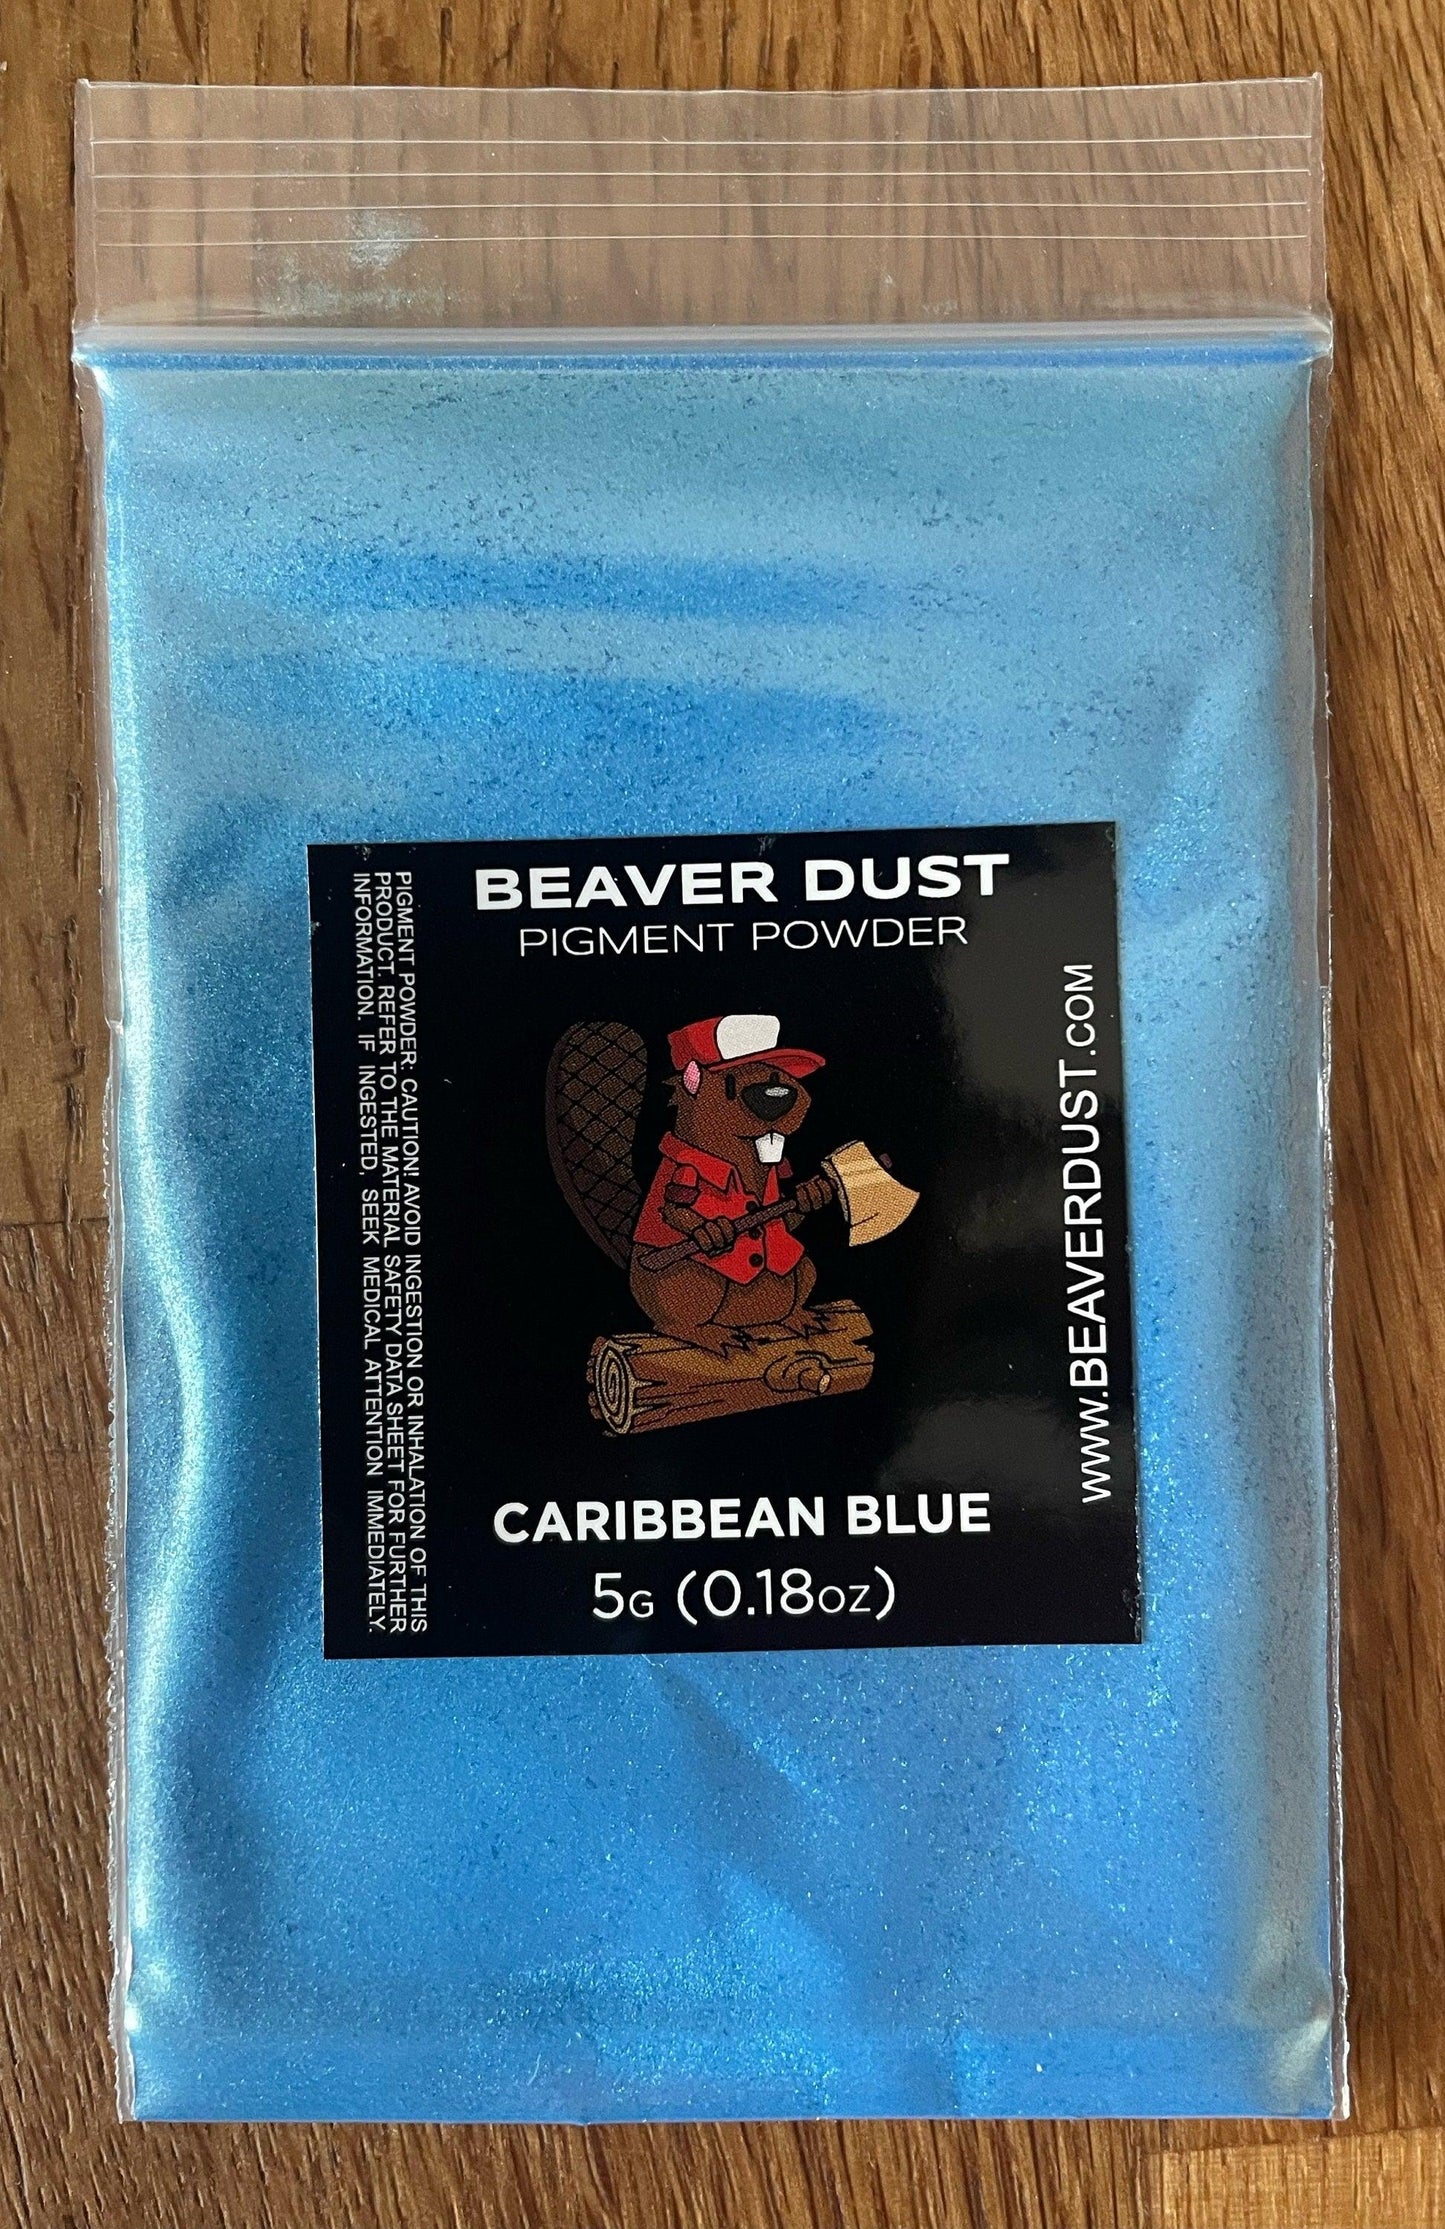 Mica Powder - Rich and Lustrous Colours - Ideal For Resin, Soap, Bath Bombs, Makeup, Nail Art and Much More - Colour is Caribbean Blue - TMResinsupplies